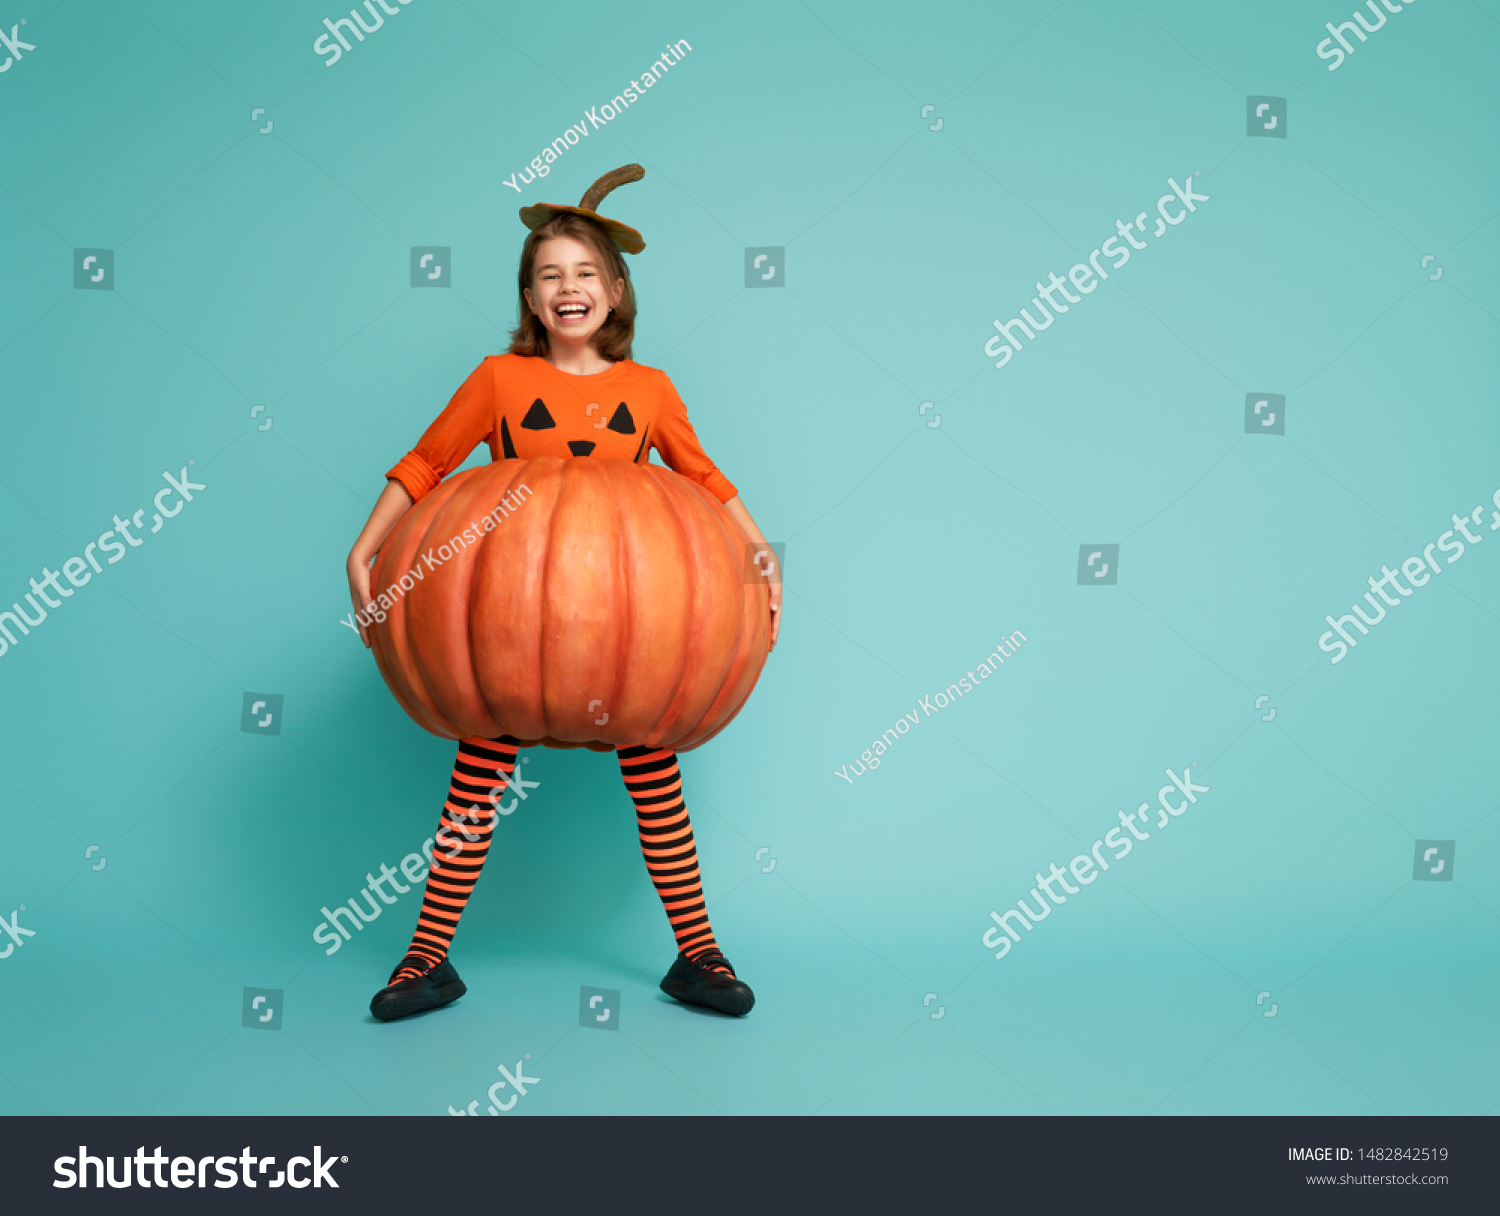 Happy Halloween! Cute little girl in pumpkin costume on turquoise background. #1482842519